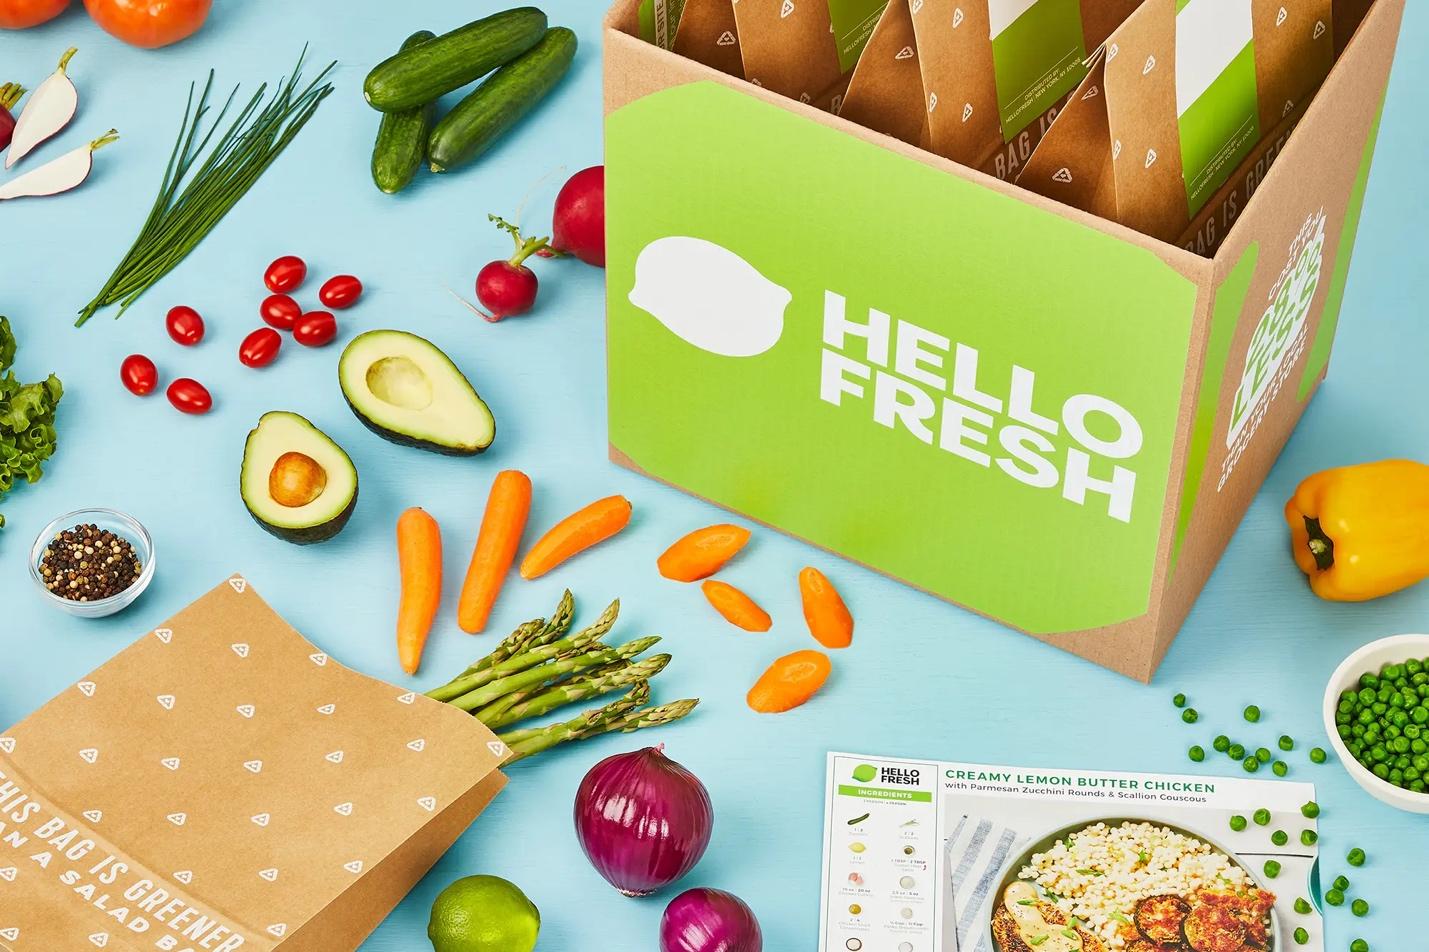 HelloFresh: Get 16 Meals Free With the No. 1 Meal Kit Service